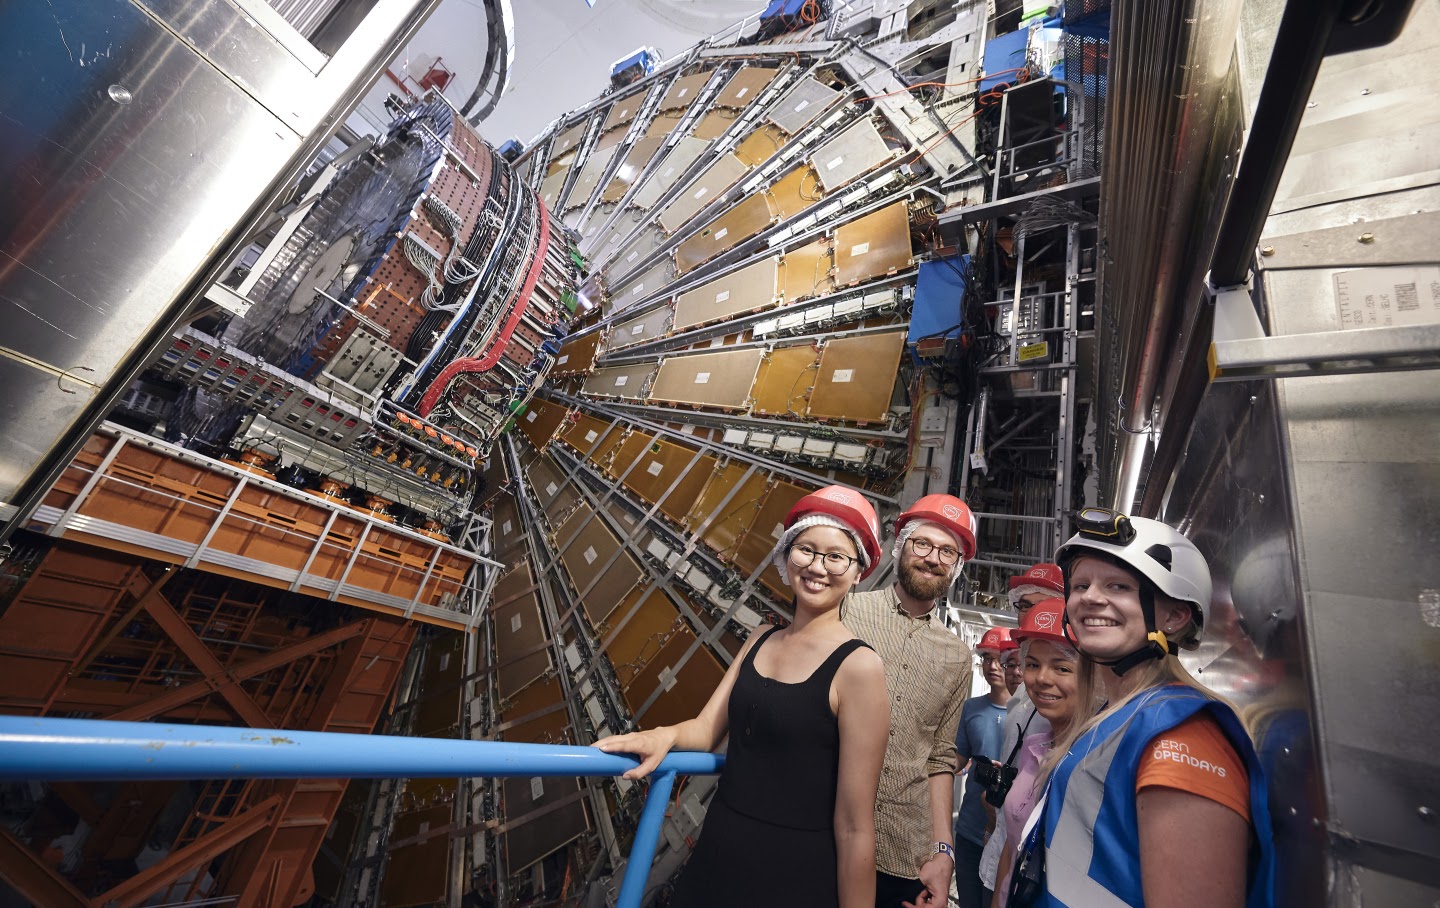 Students in front of the ATLAS instrument